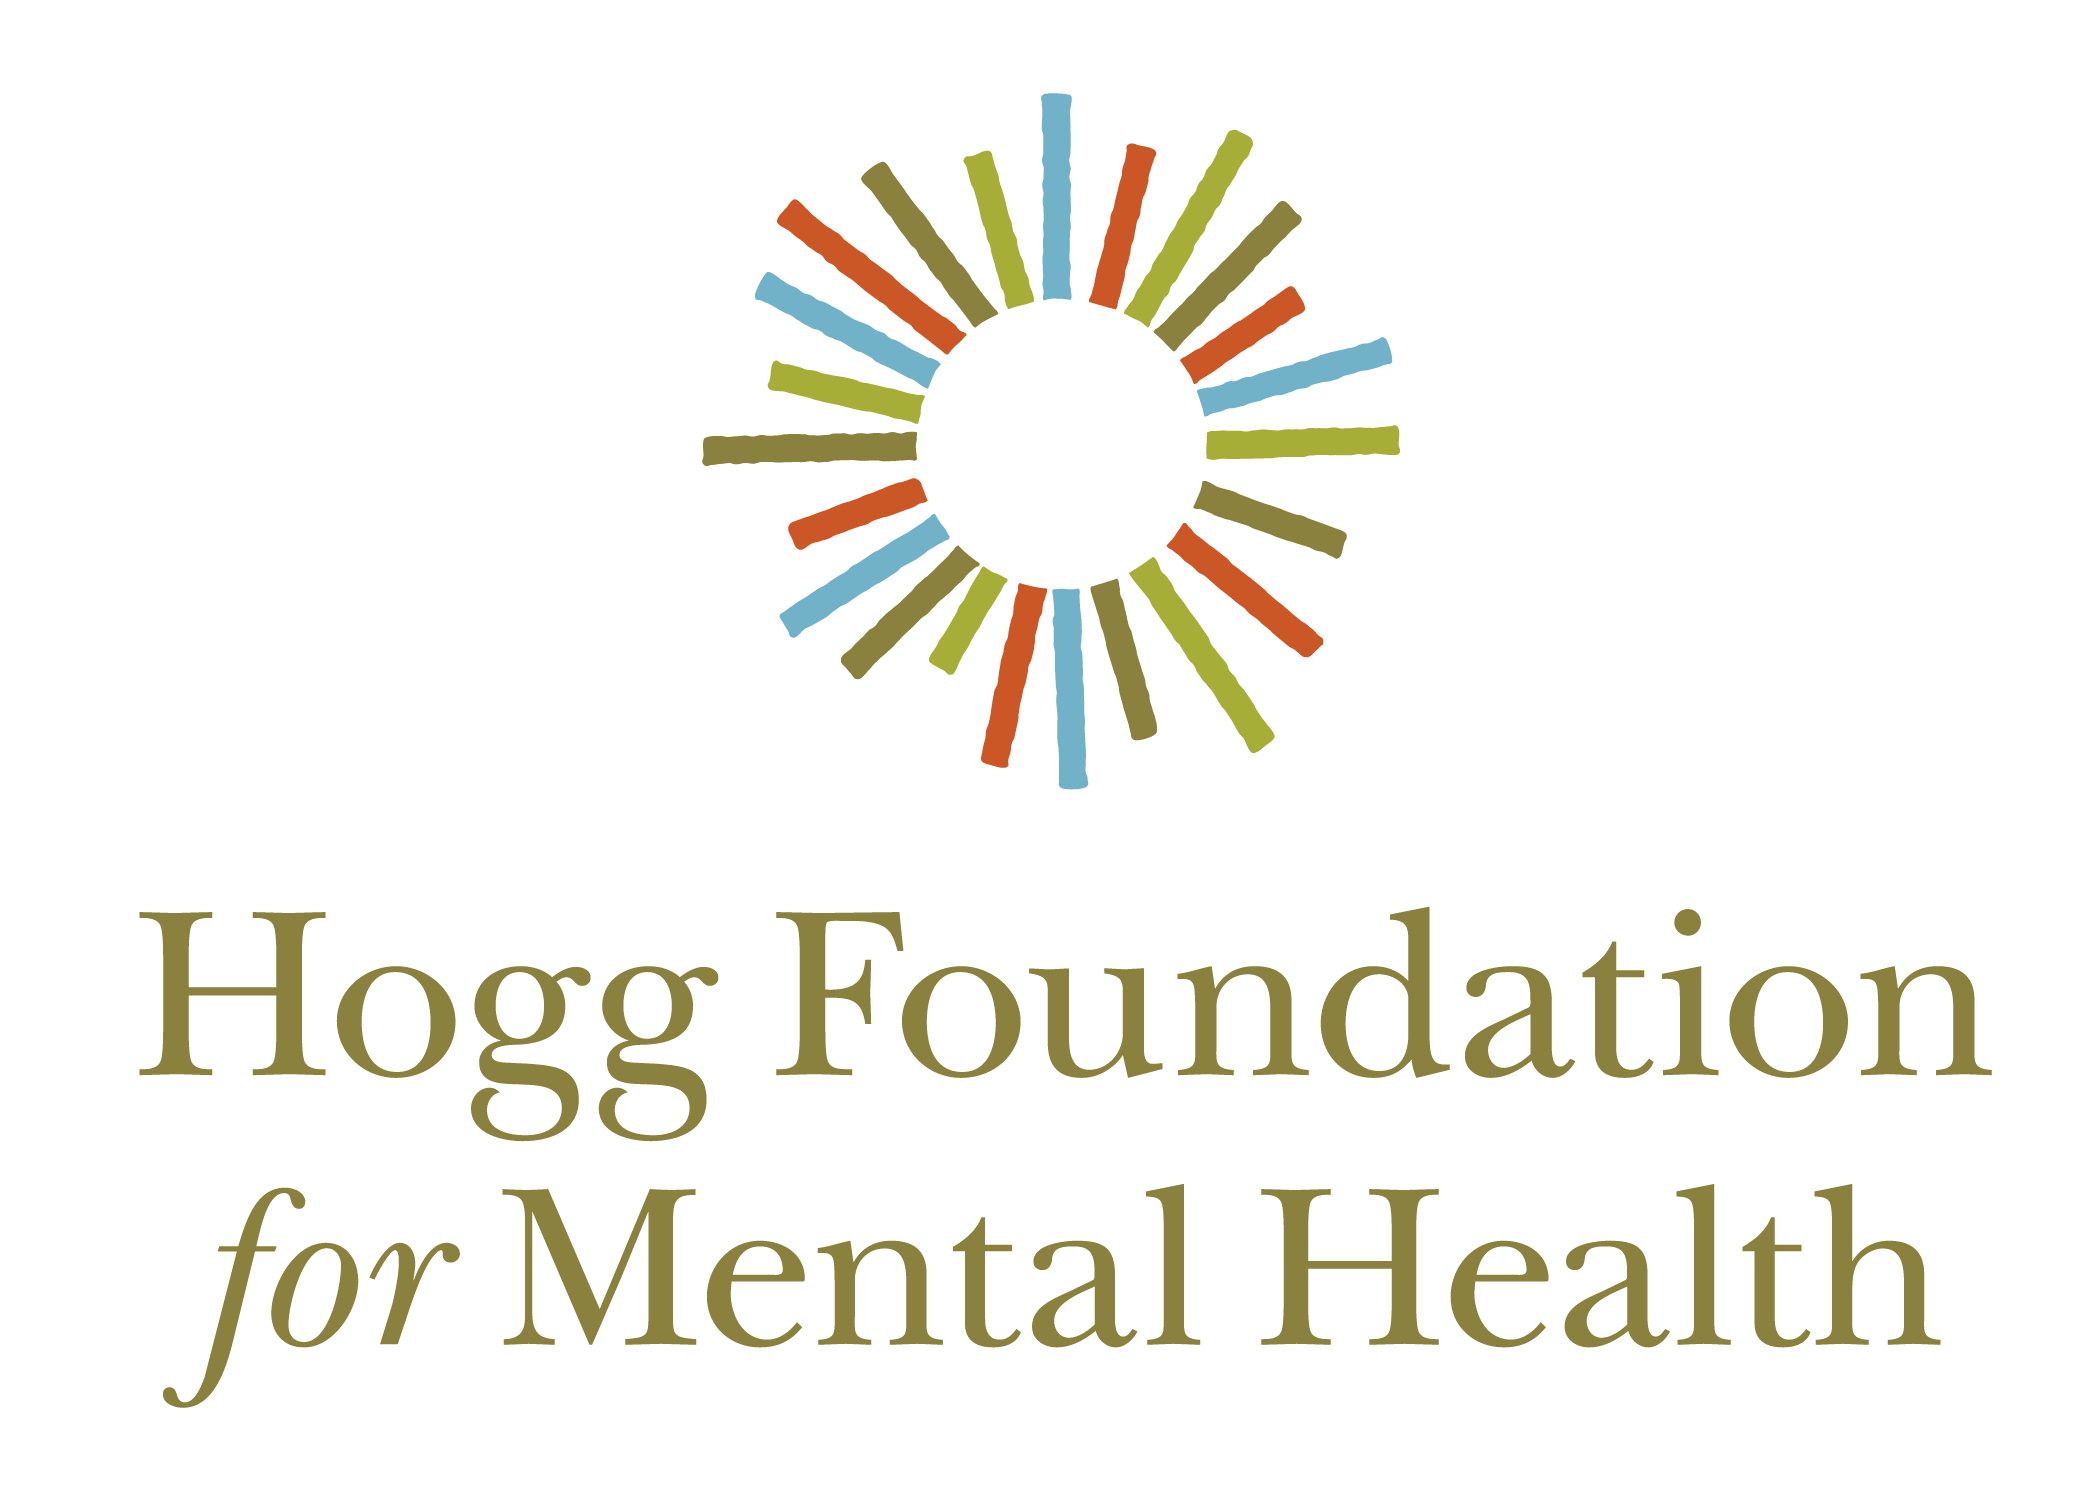 The Hogg Foundation for Mental Health logo features a graphic of a circle with rays in light blue, bright green, khaki green, and red-orange, symbolizing a colorful sun. Below the sun graphic, the text "Hogg Foundation for Mental Health" is written in khaki green. “For” is italicized. The logo represents the foundation's mission to advance mental health services, advocacy, and research, fostering positive change and support for individuals and communities impacted by mental health challenges.